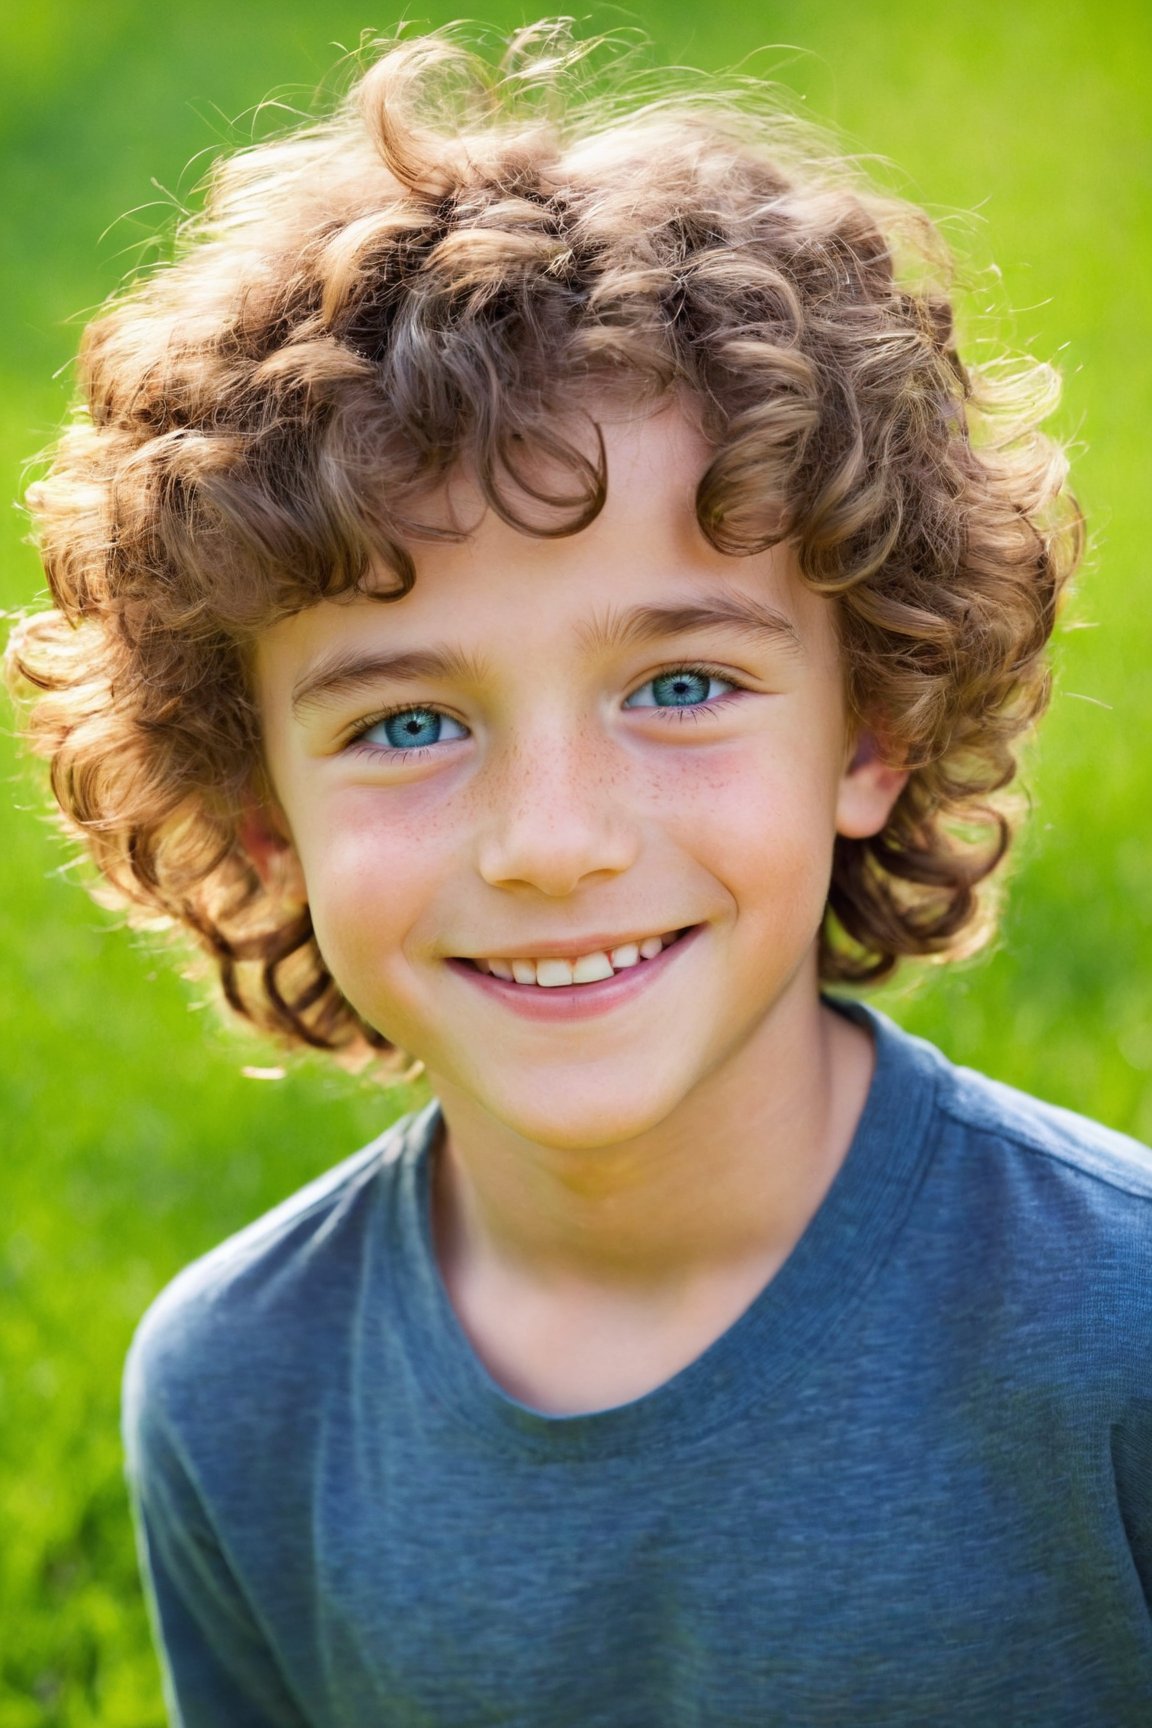 (best quality,highres,masterpiece:1.2),beautiful detailed face, cute smile,outdoor,boy,blue eyes,soft curly hair,lively expression,playful pose,vibrant colors,warm sunlight,green grass,trees in the background